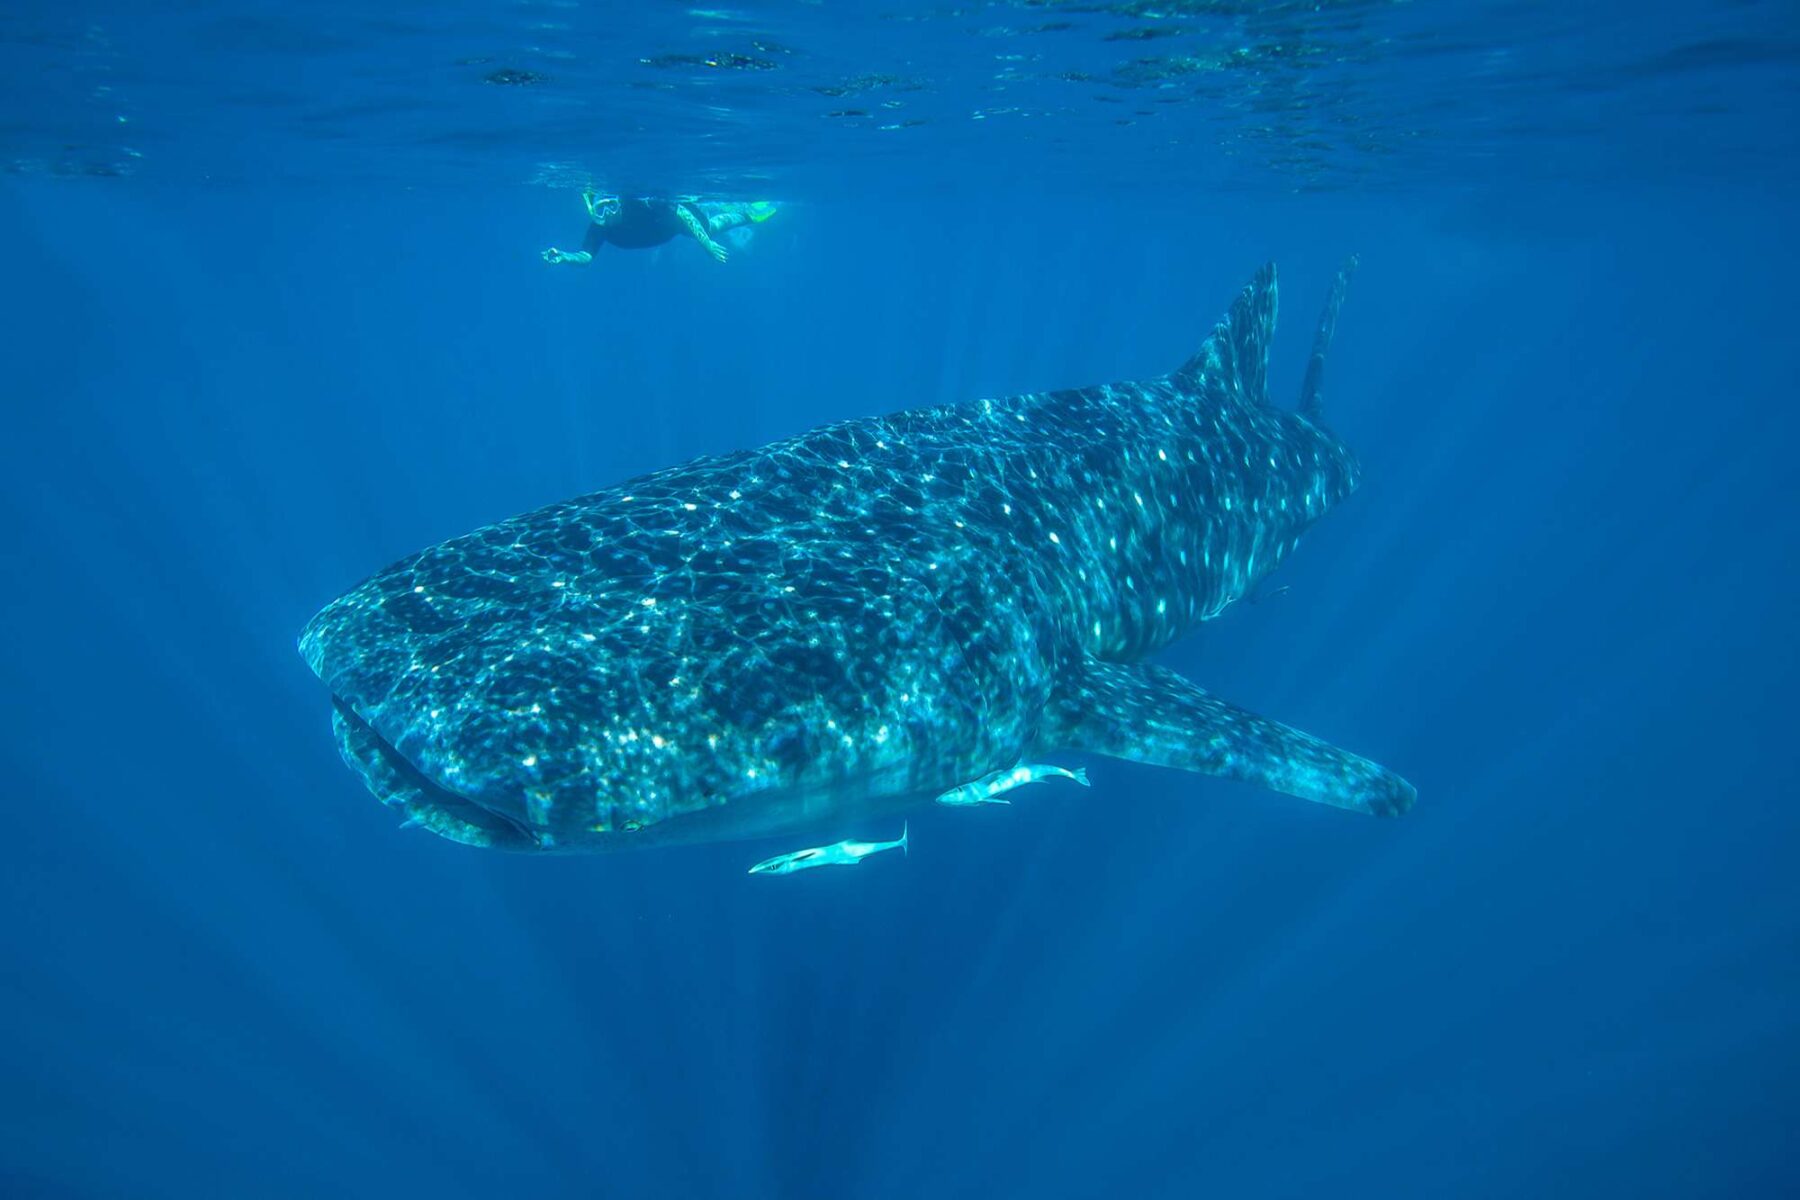 western australia snorkelling with whale shark at ningaloo reef istk